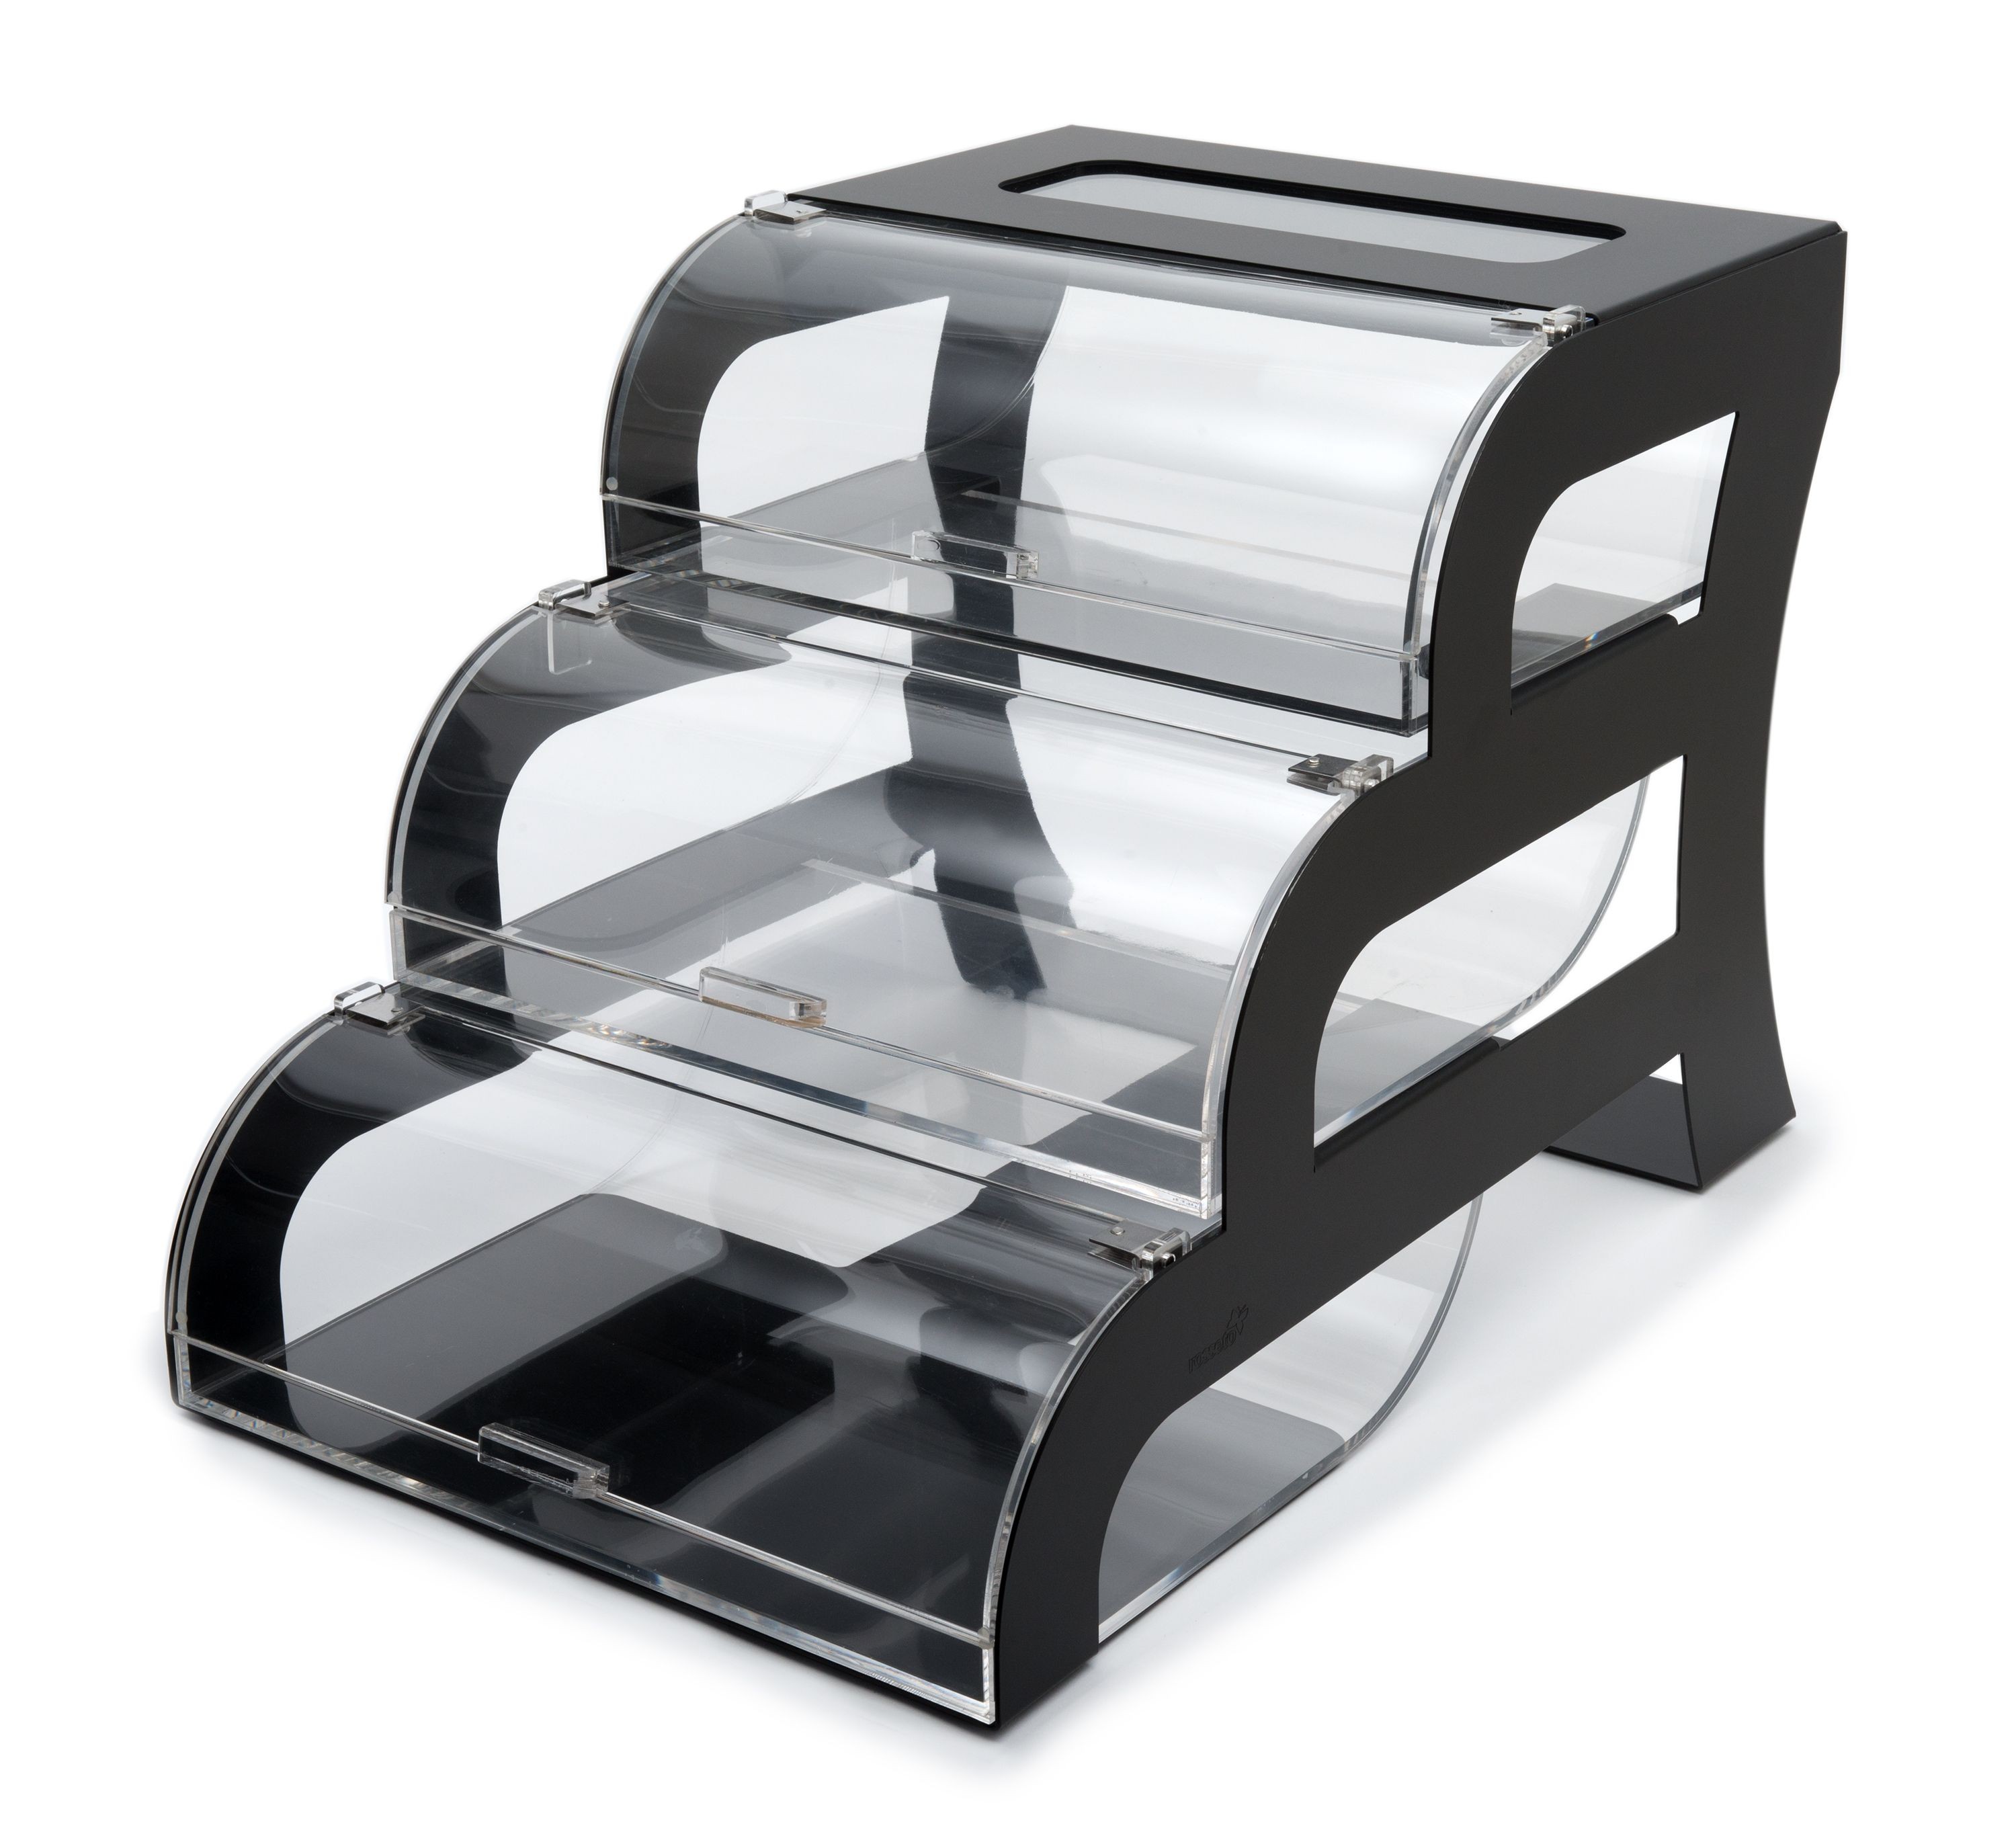 Rosseto BK011 Three-Tier Clear Acrylic Bakery Display Case with Black Steel Stand 15.25" x 23.25" x 15.5"